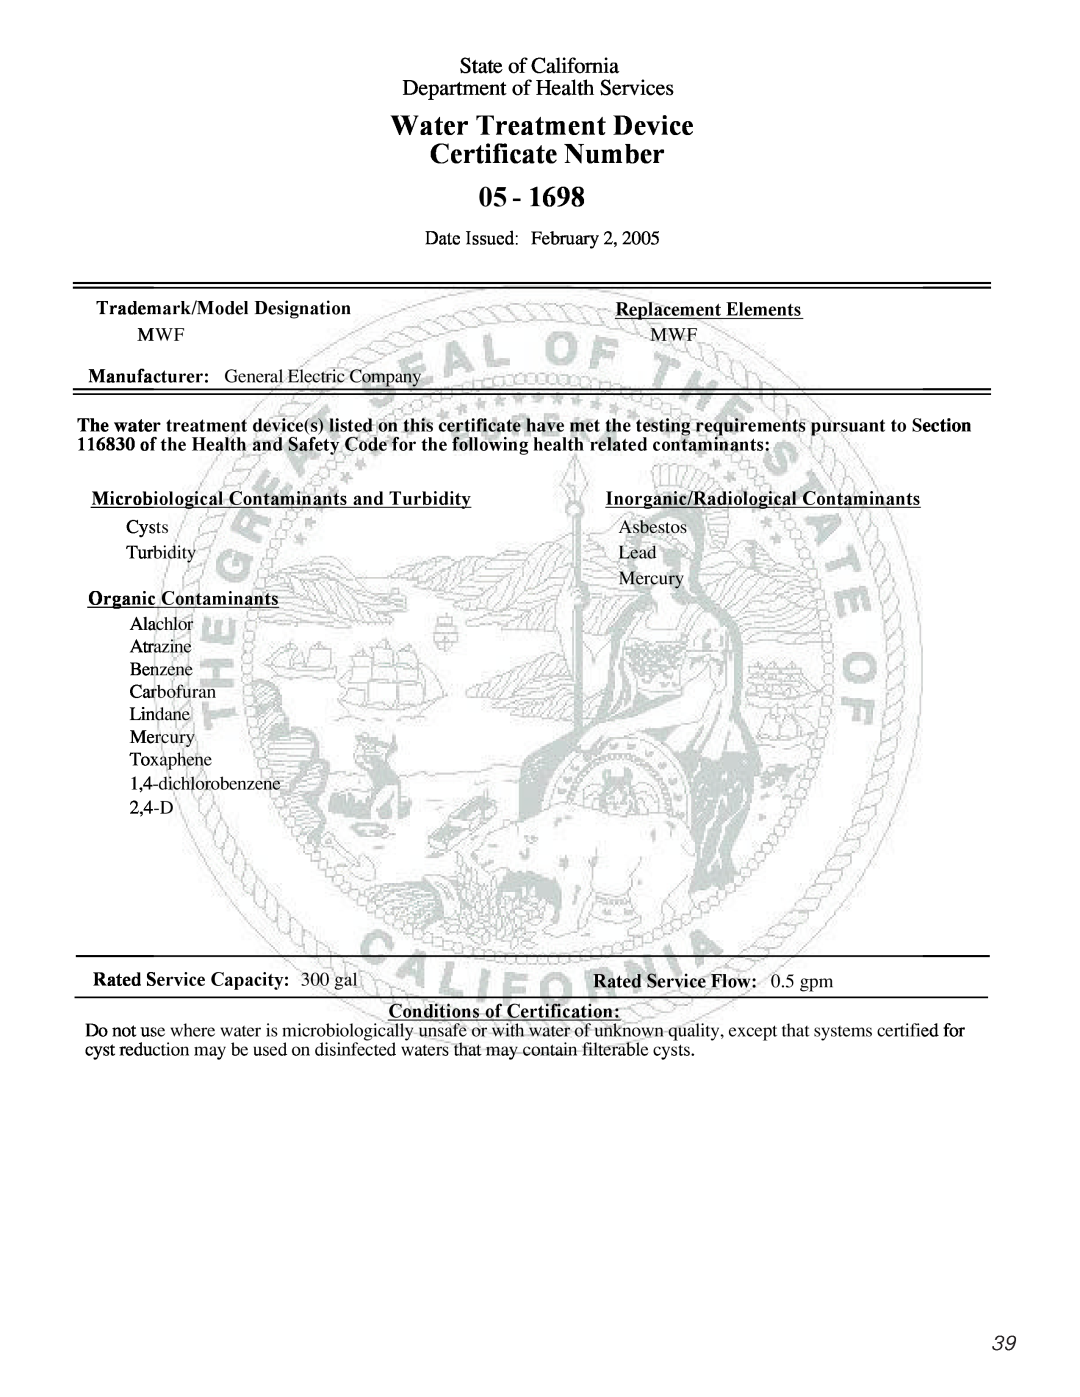 GE MODELS 23 AND 25 Water Treatment Device, Certificate Number, State of California, Department of Health Services 